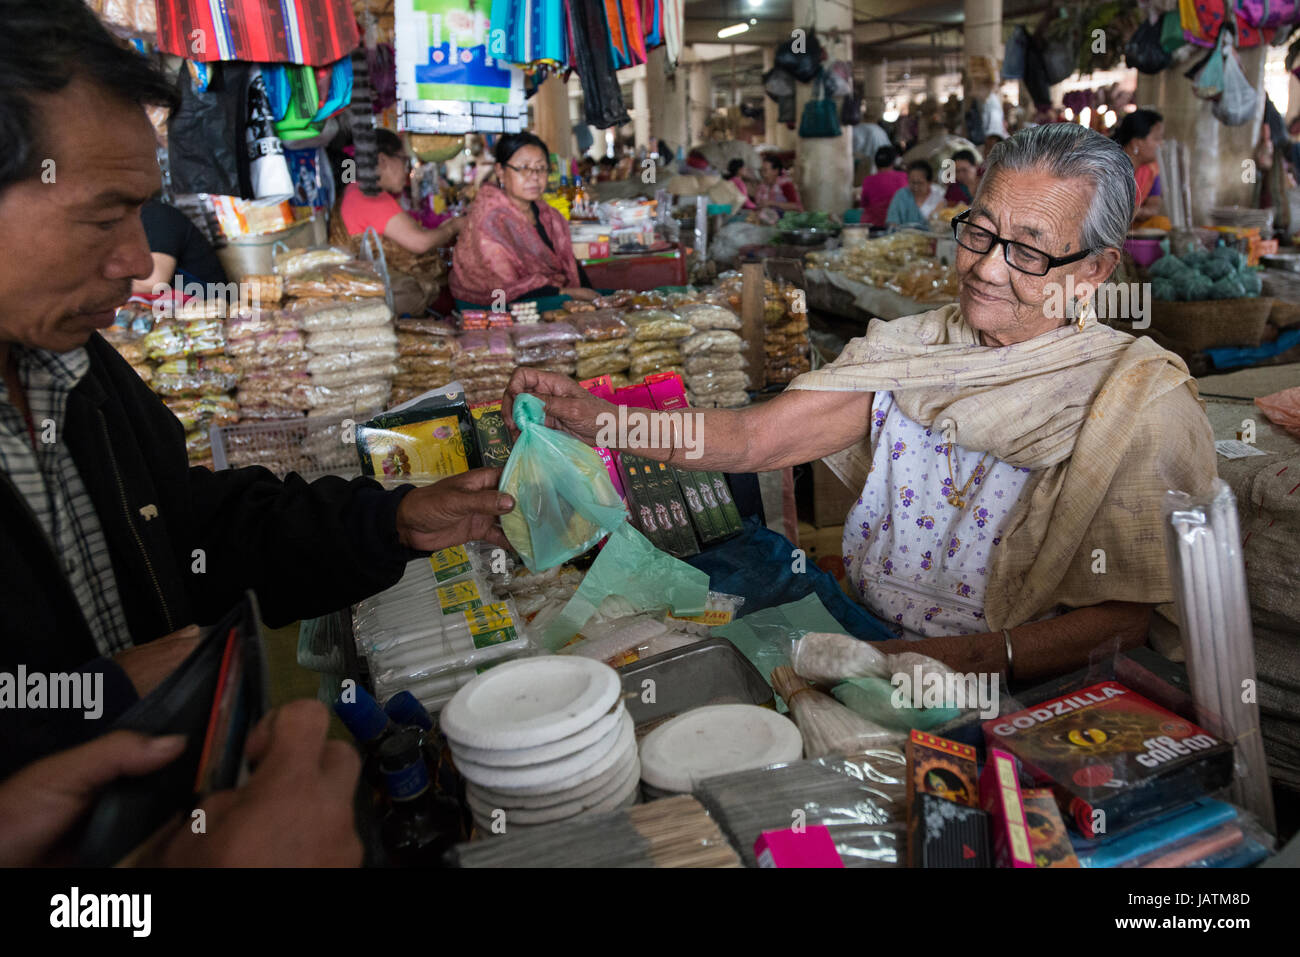 A market trader sells her wares at an indoor market stall in Imphal, Manipur, India Stock Photo